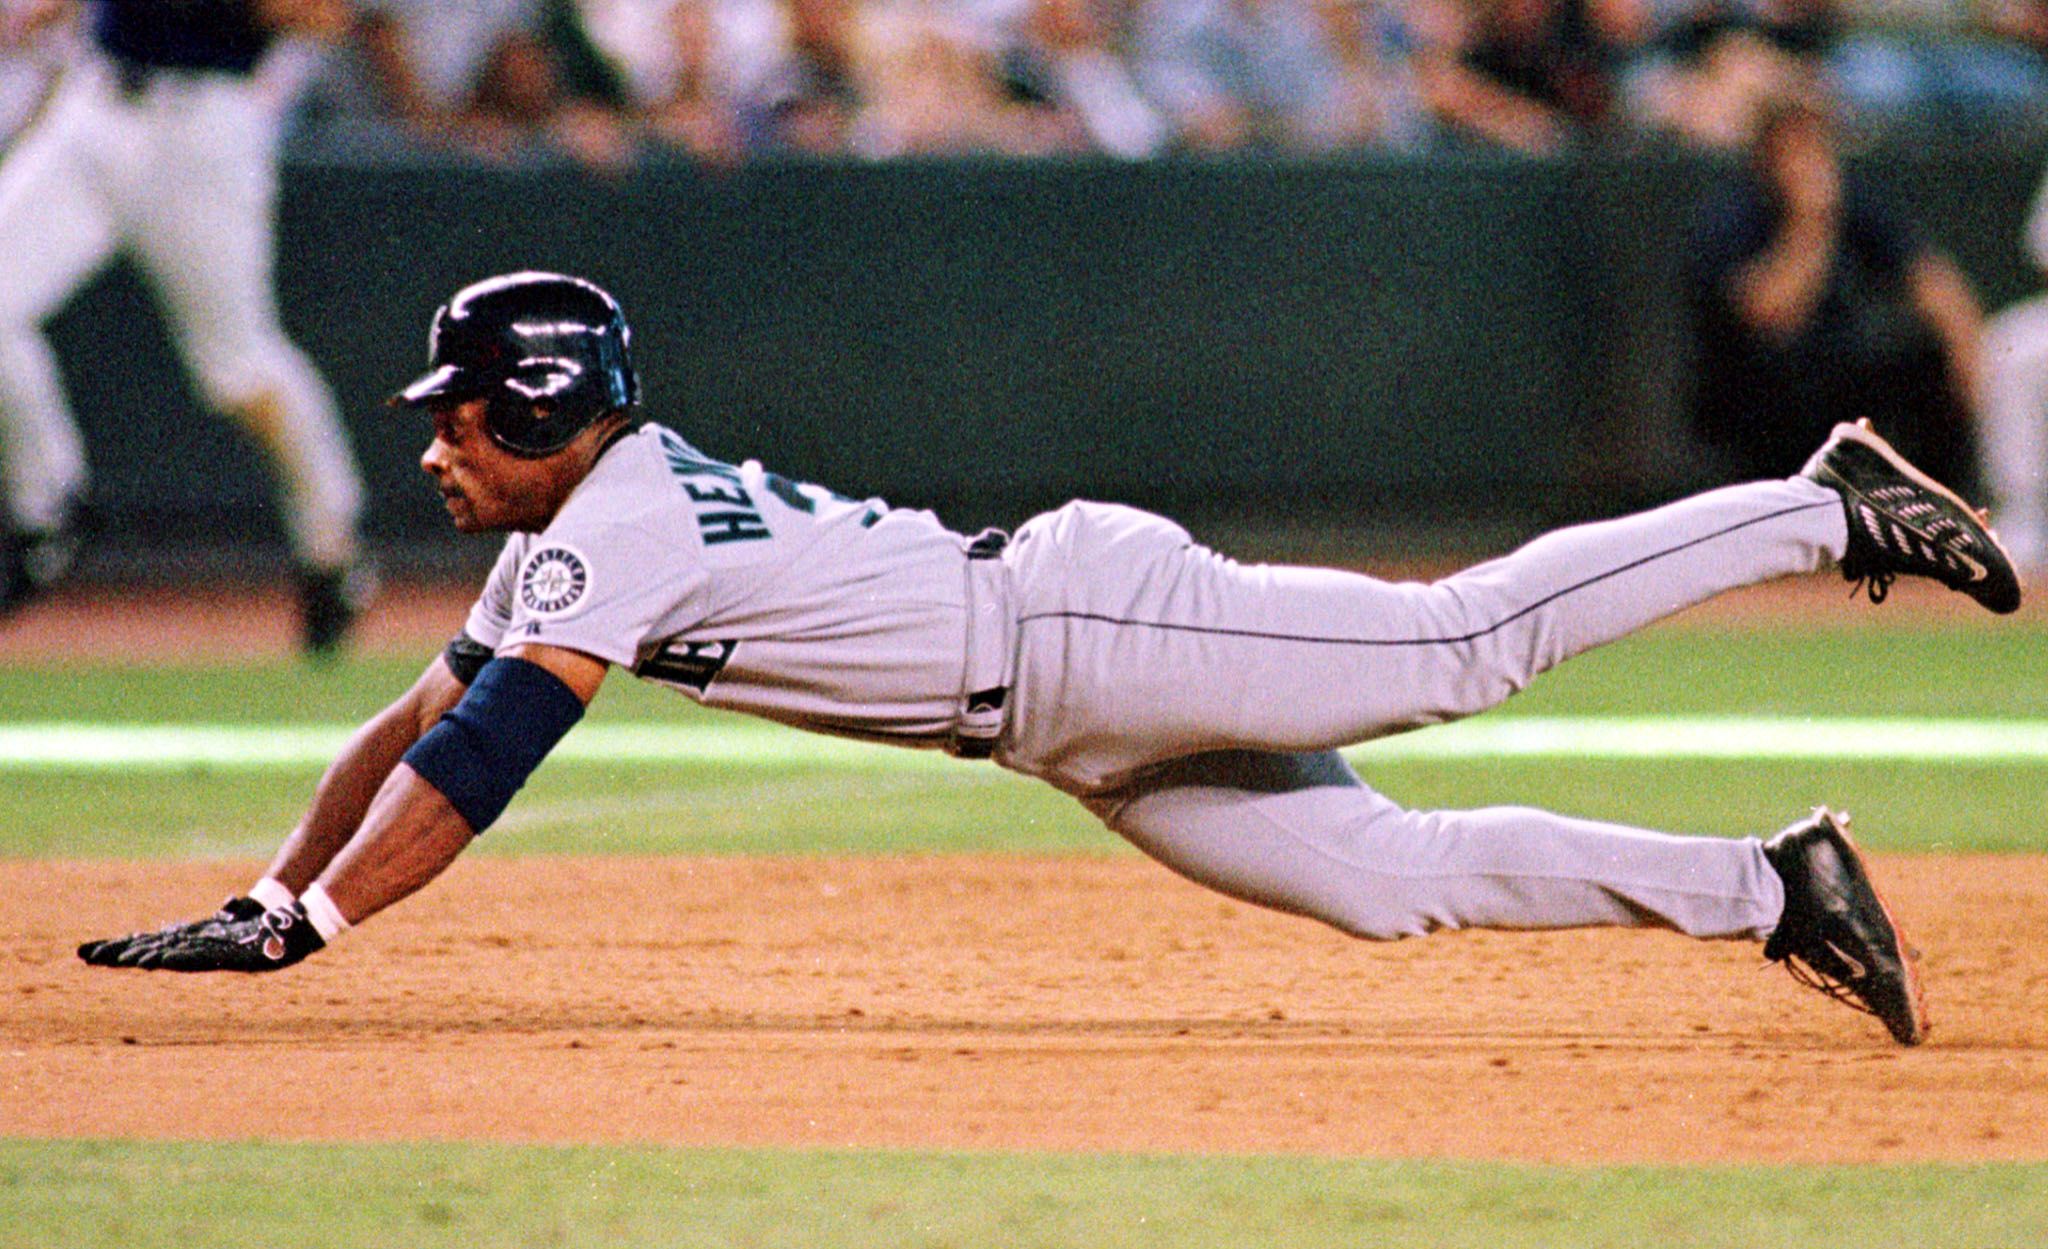 The Top 10 Base Stealers in MLB History